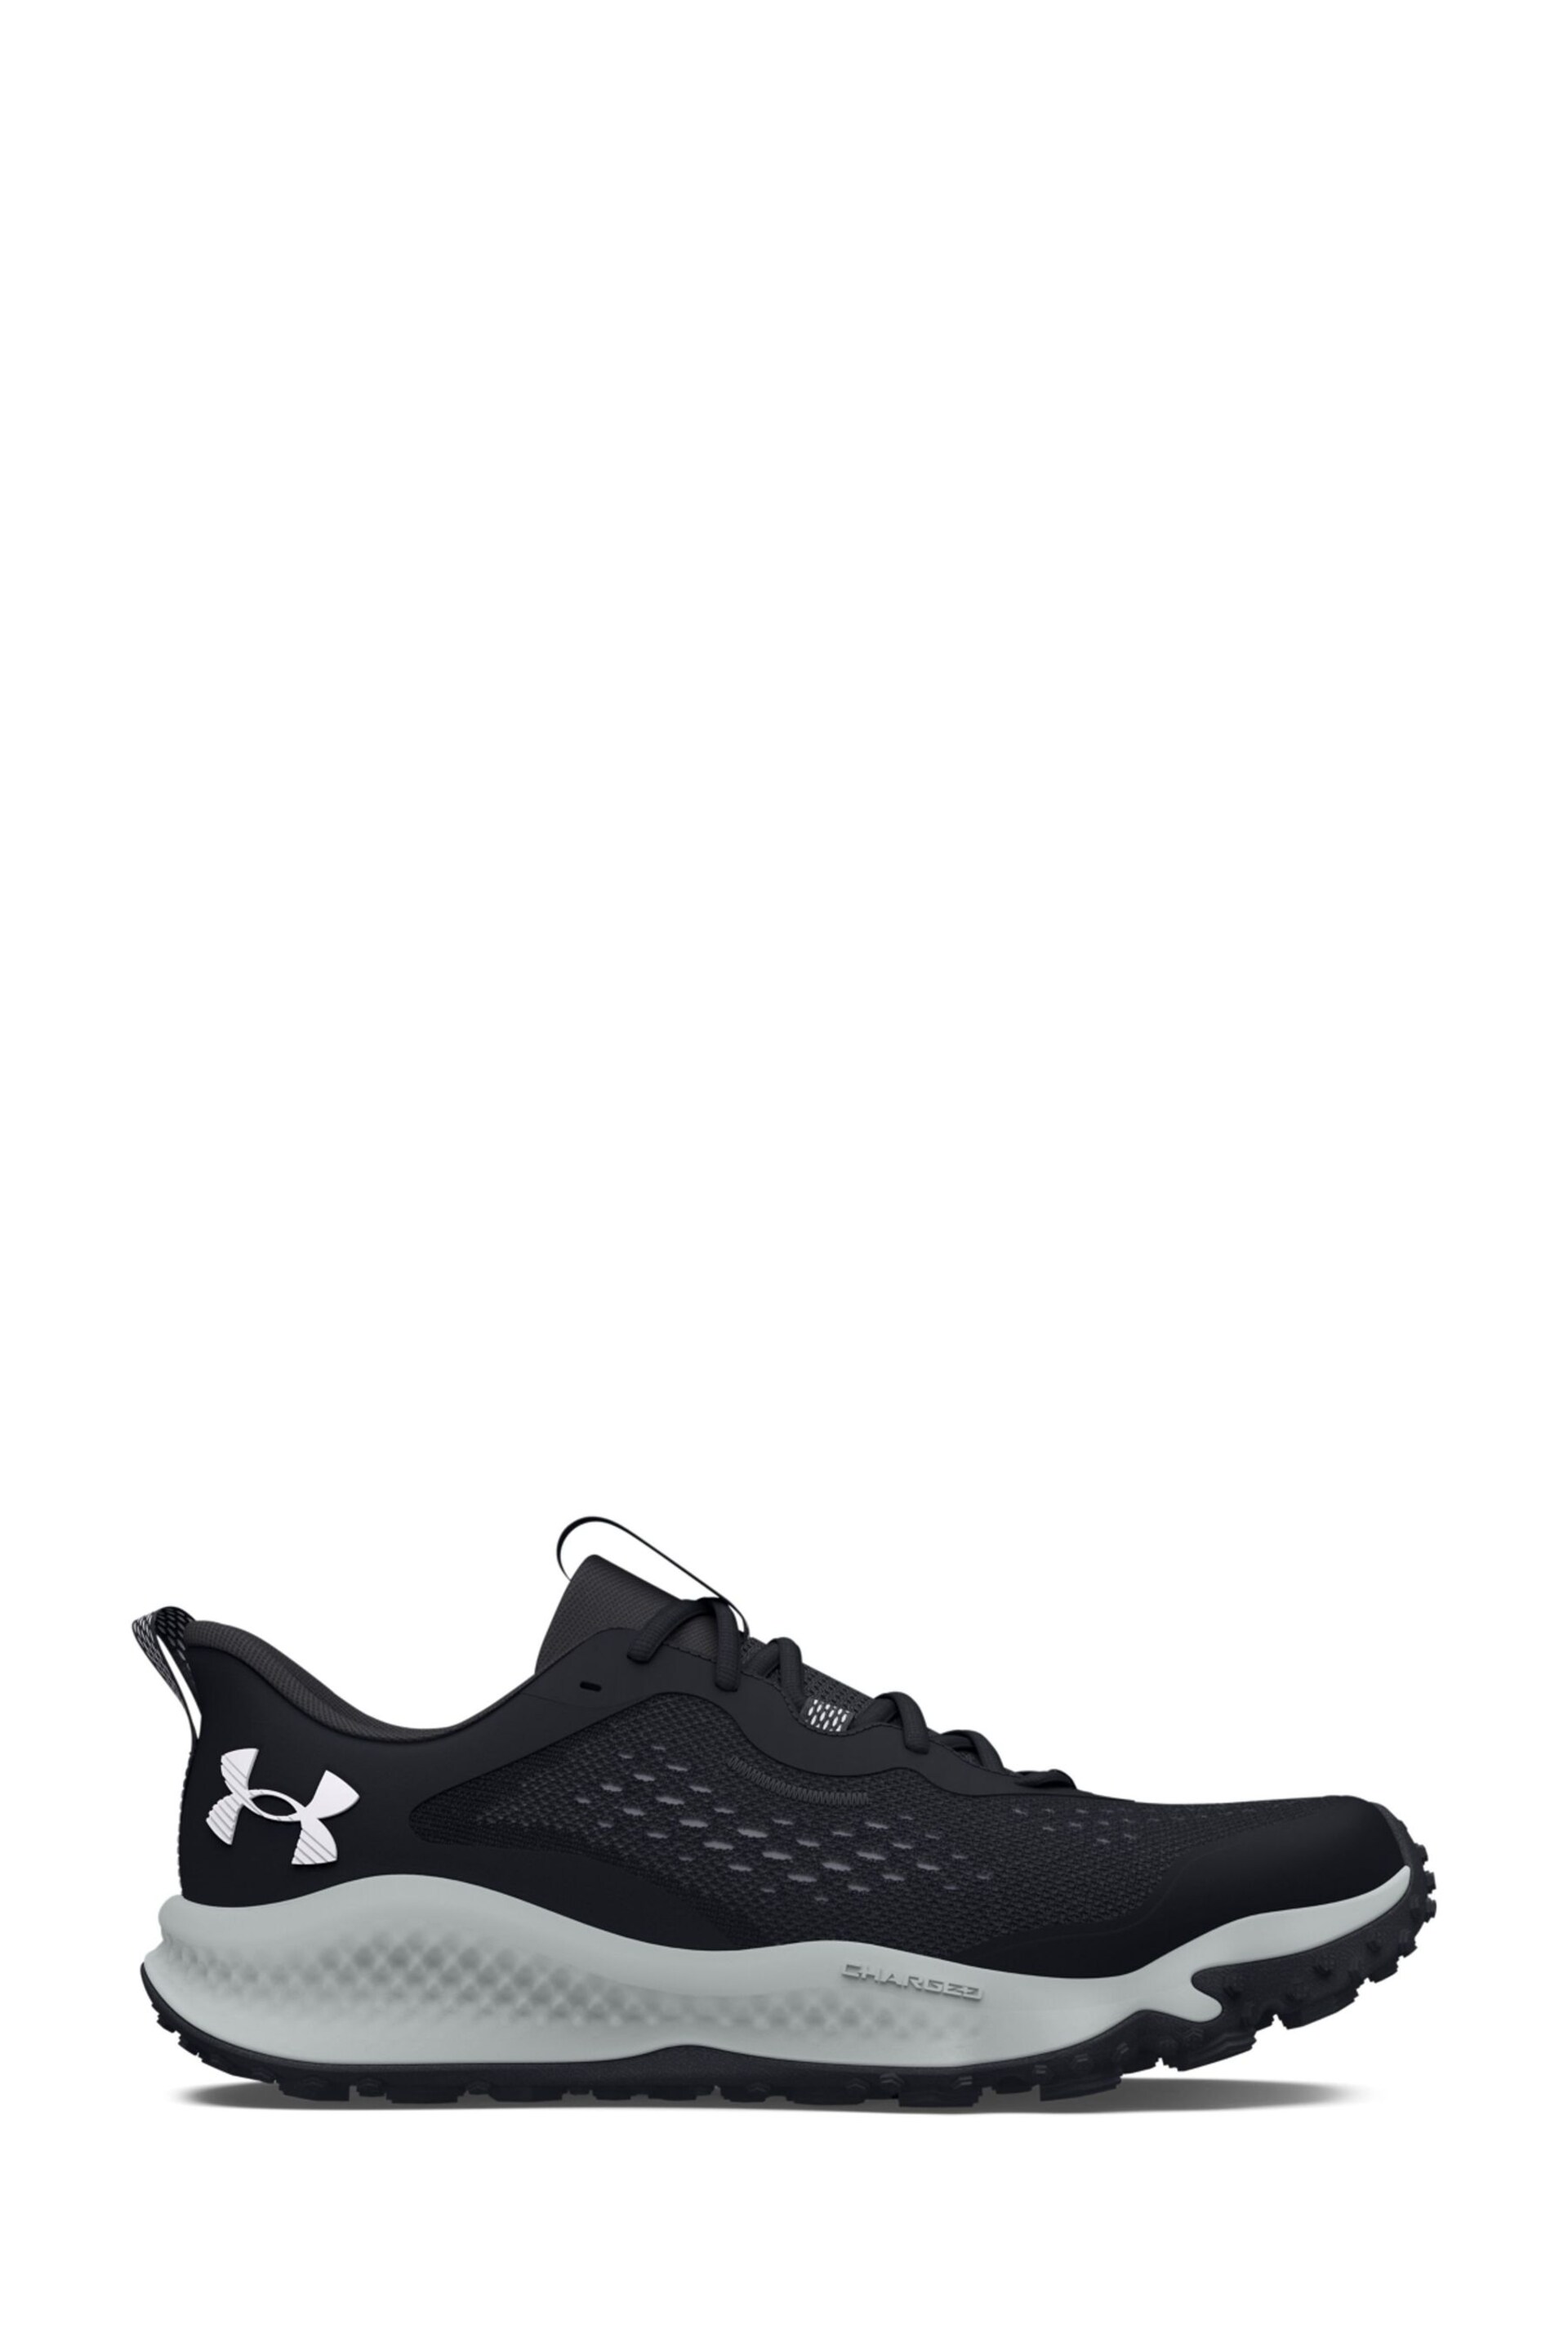 Under Armour Charged Maven Black Trainers - Image 1 of 6